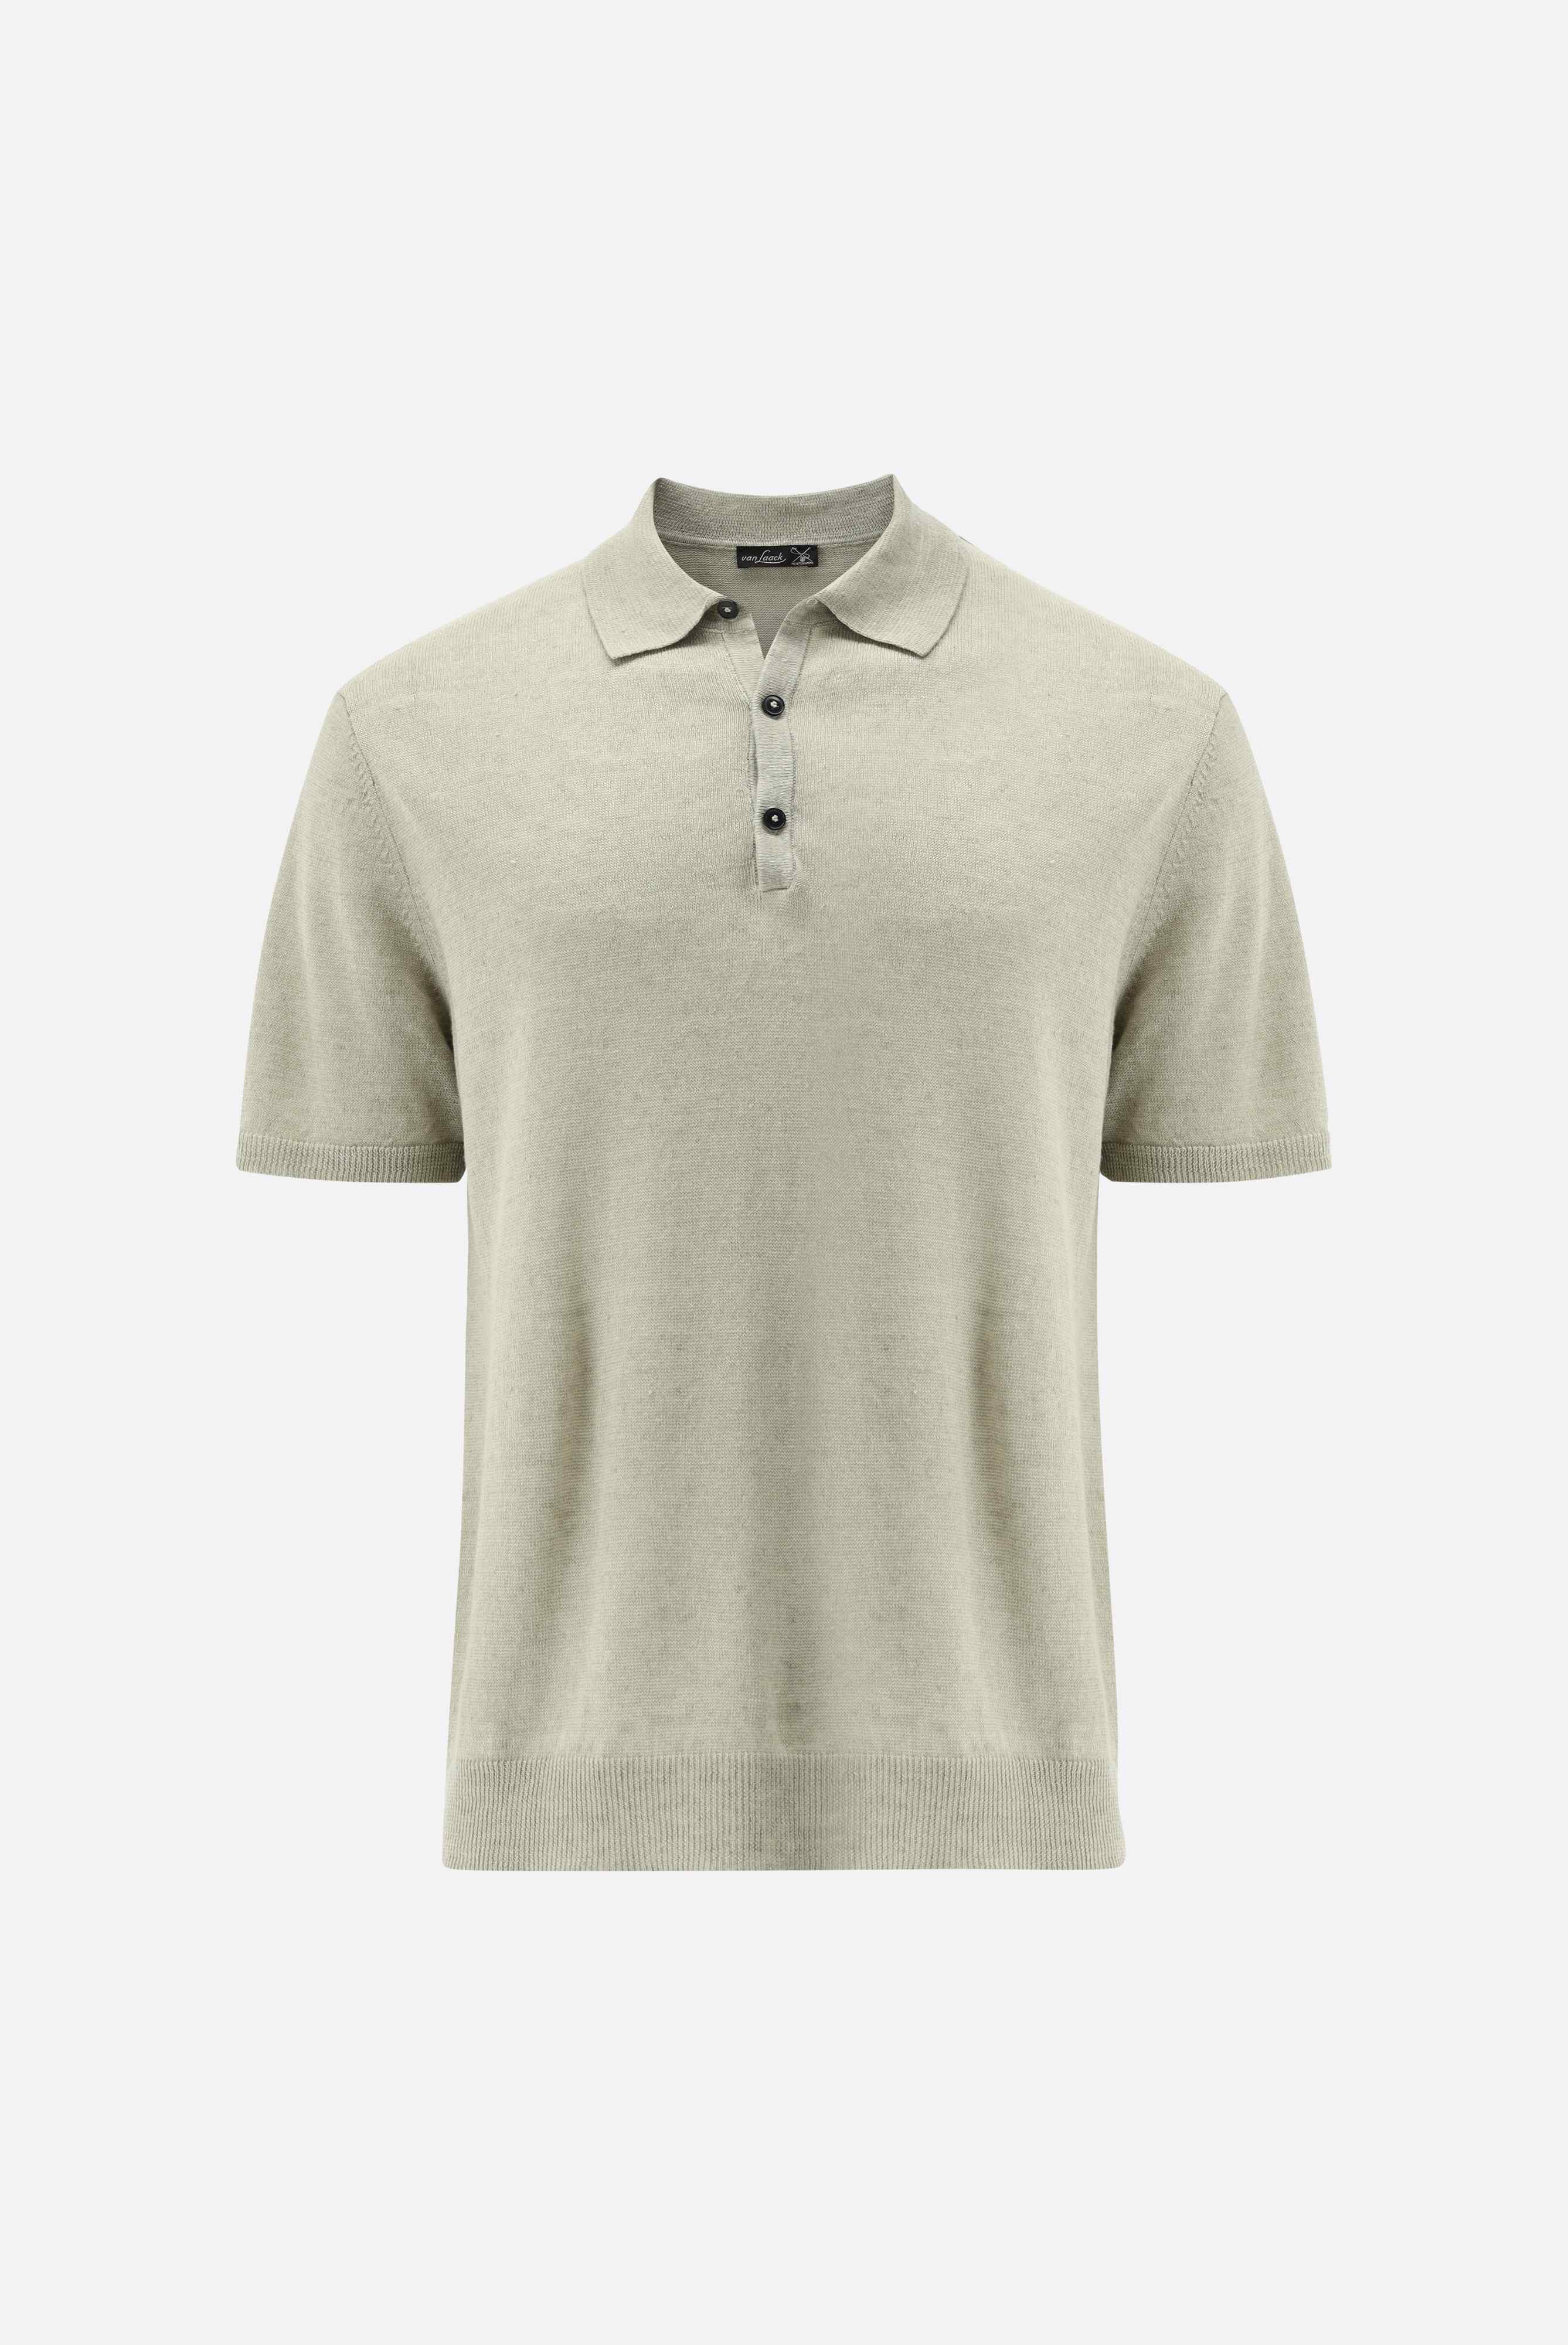 Poloshirts+Knit Polo in Linen+82.8603..S00169.940.S